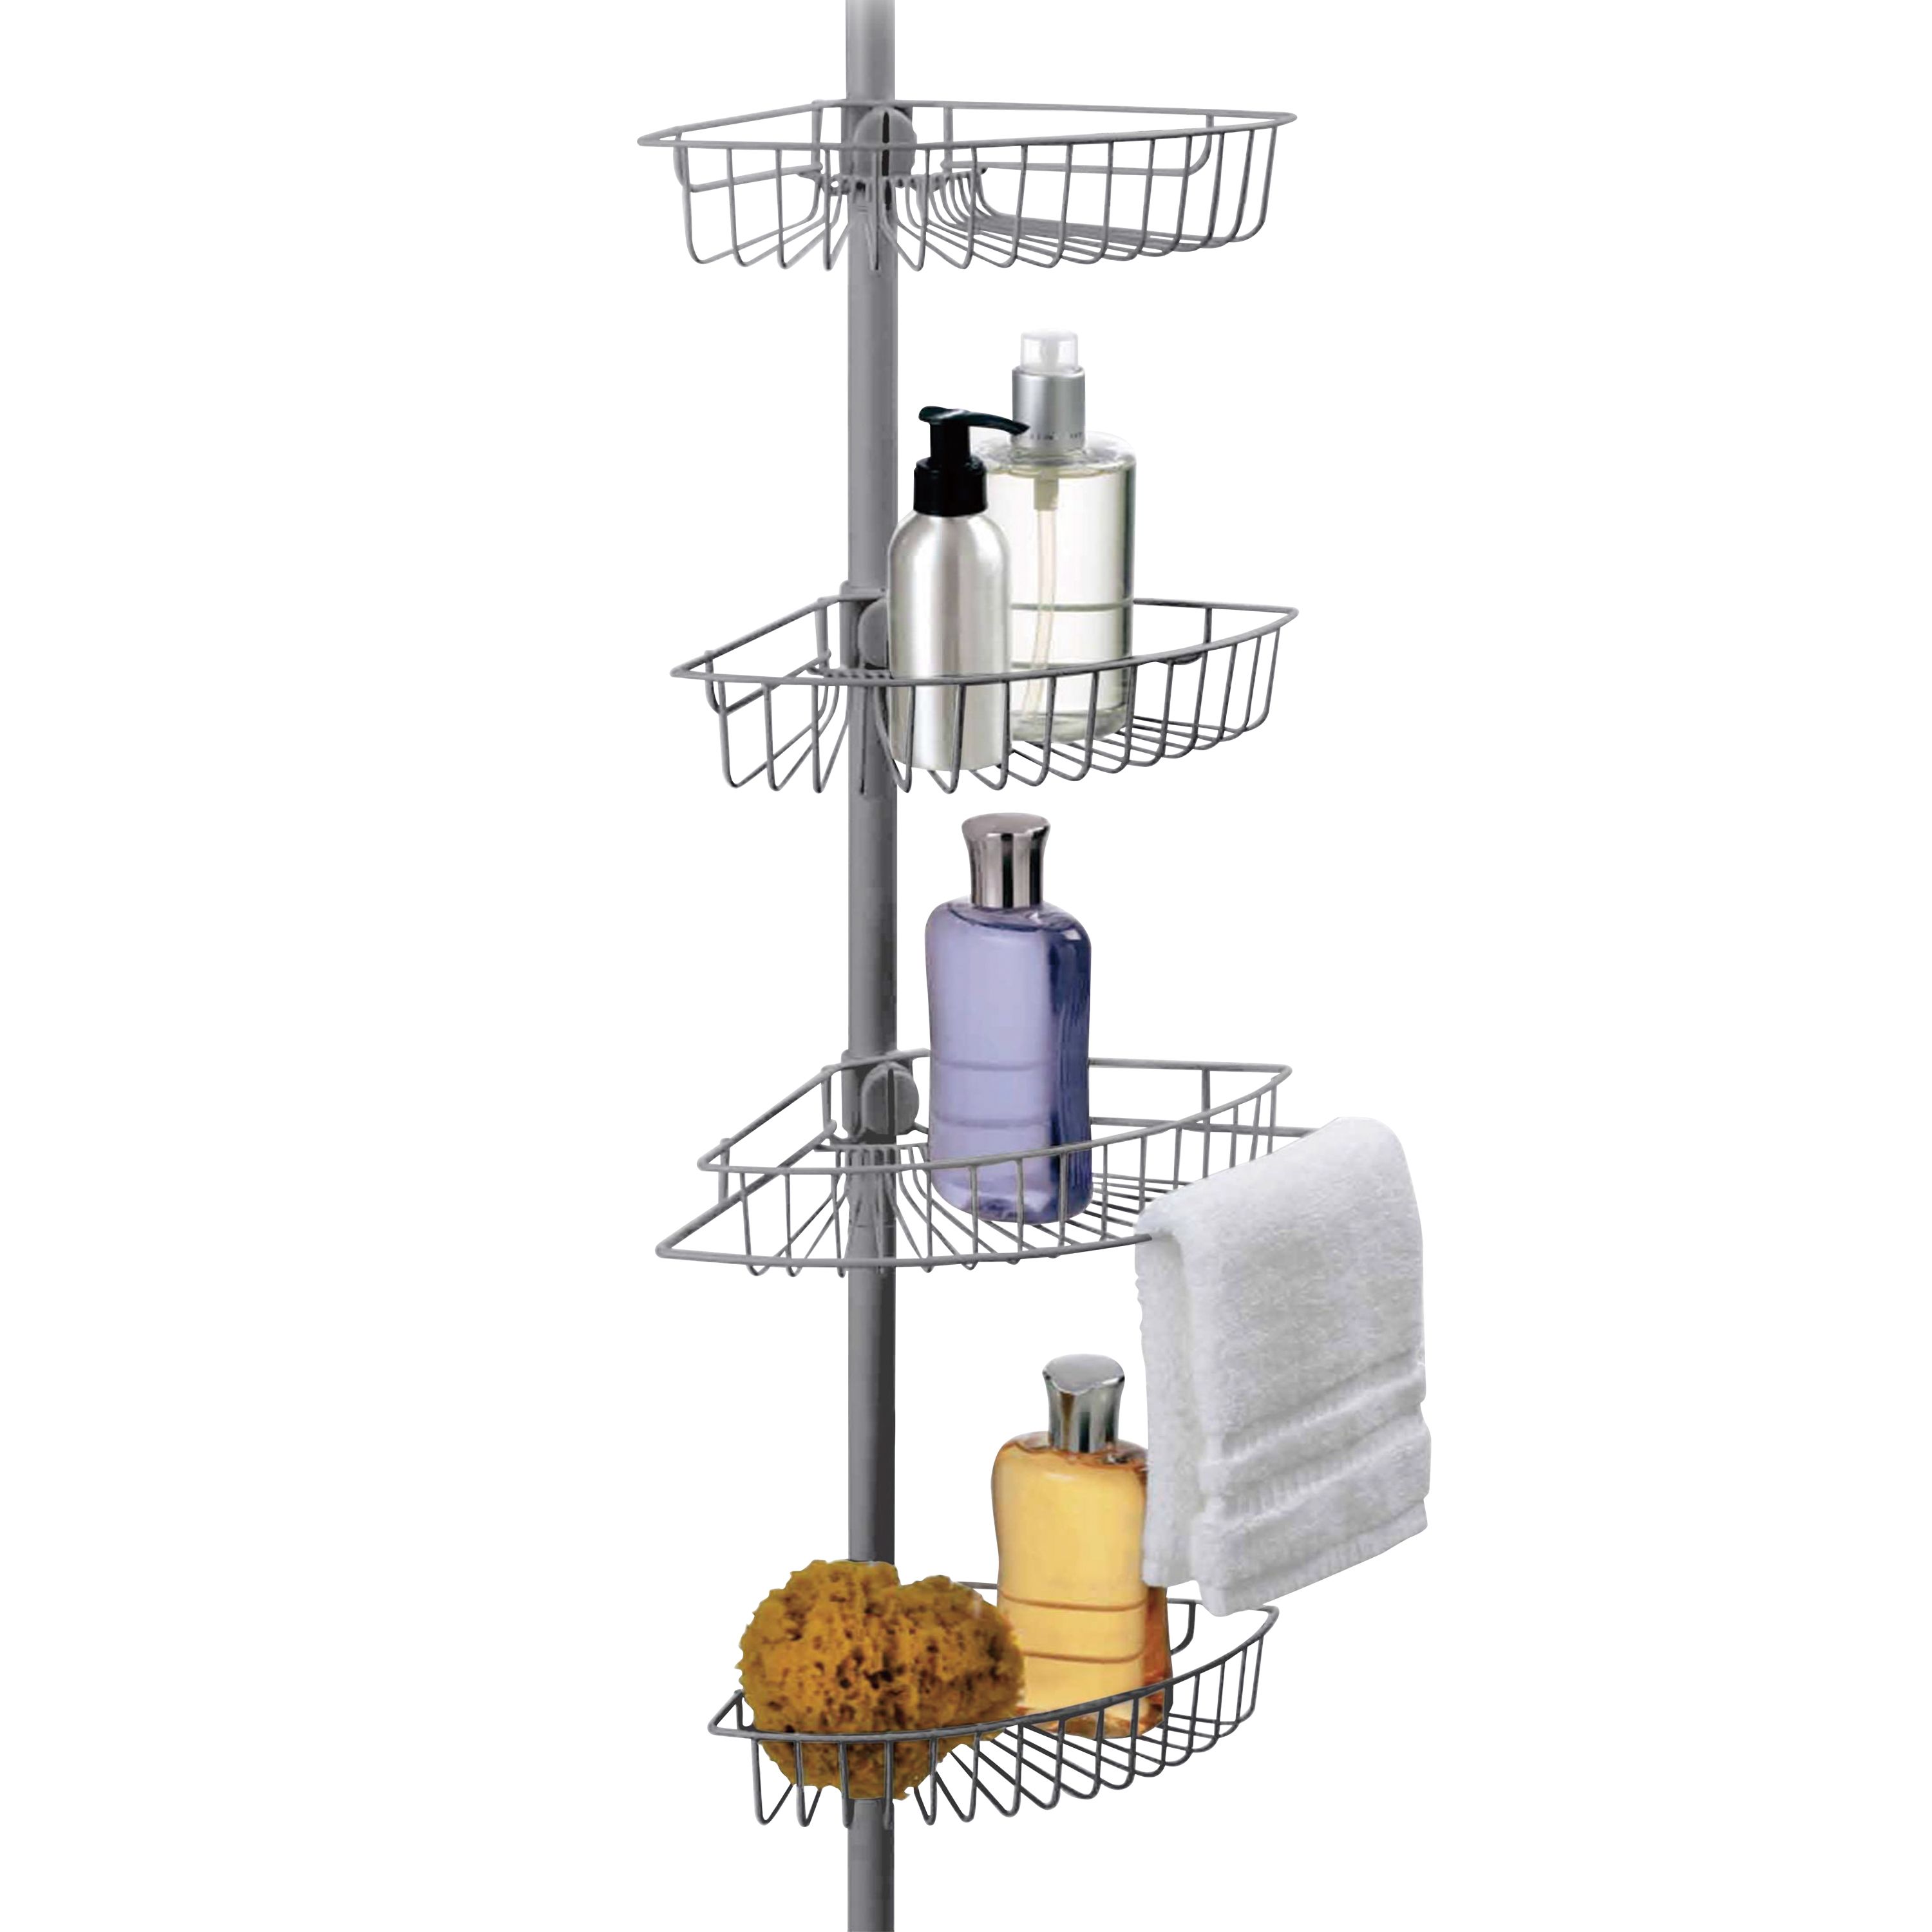 Lakeview Four-Shelf Tension Pole Caddy in White 